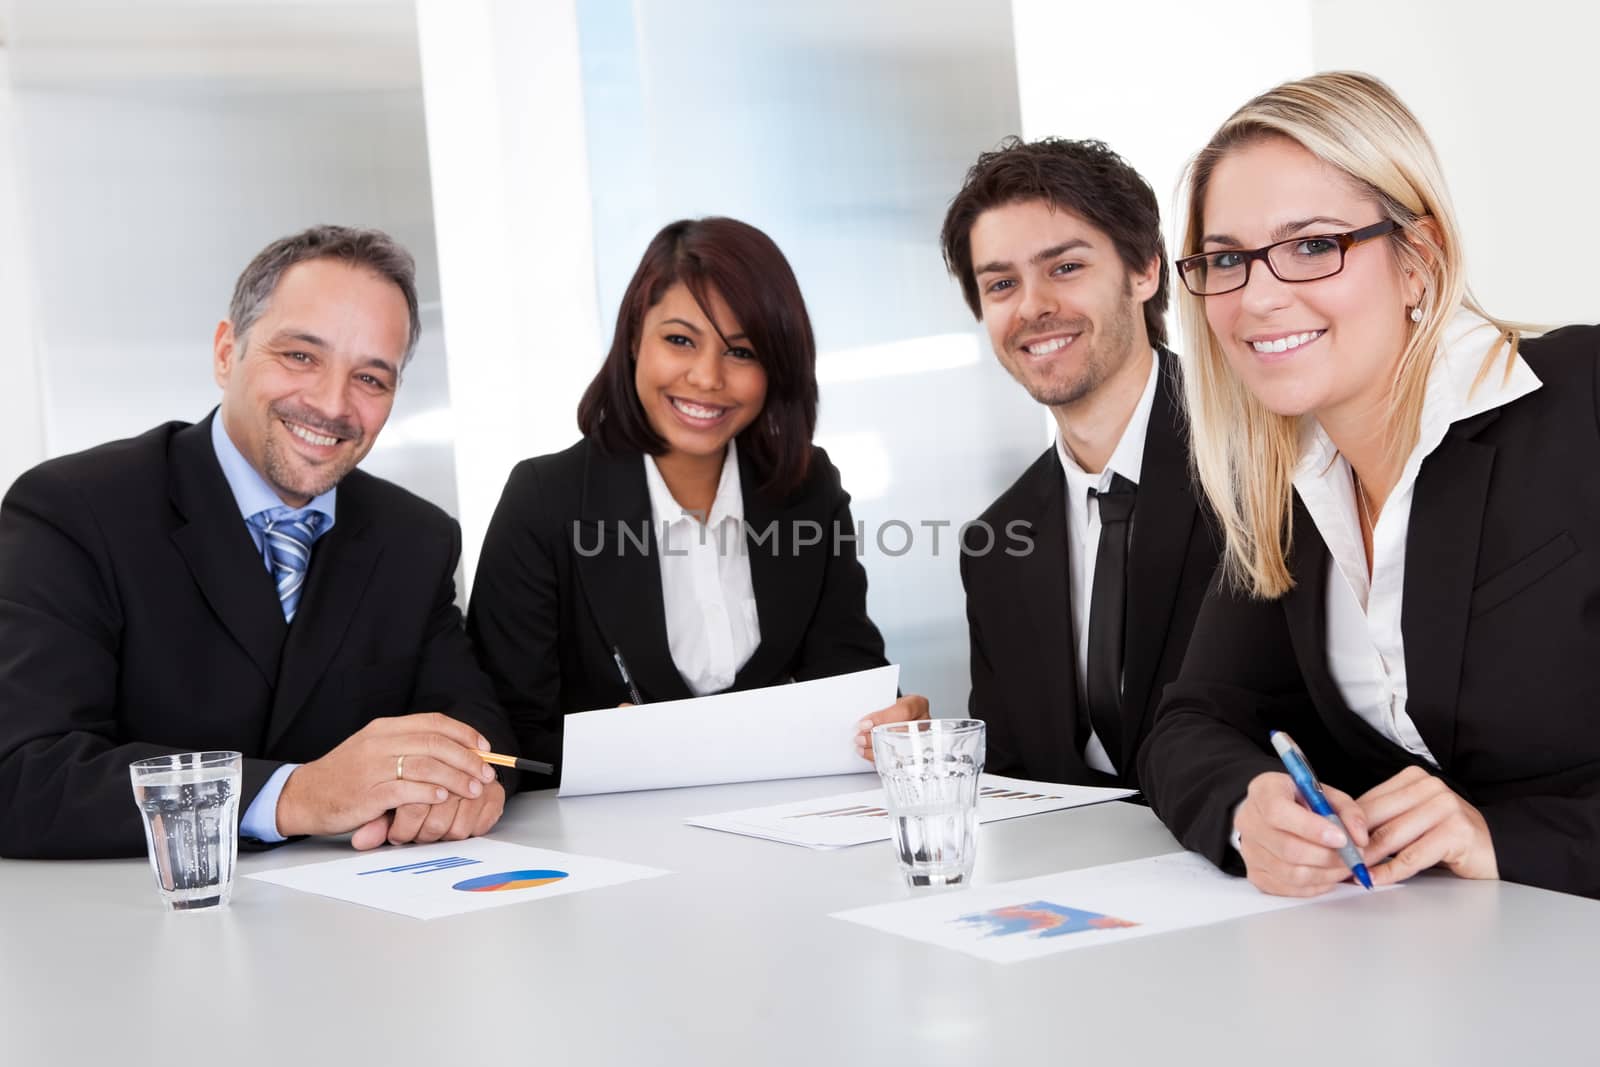 Group of business people at the meeting discussing